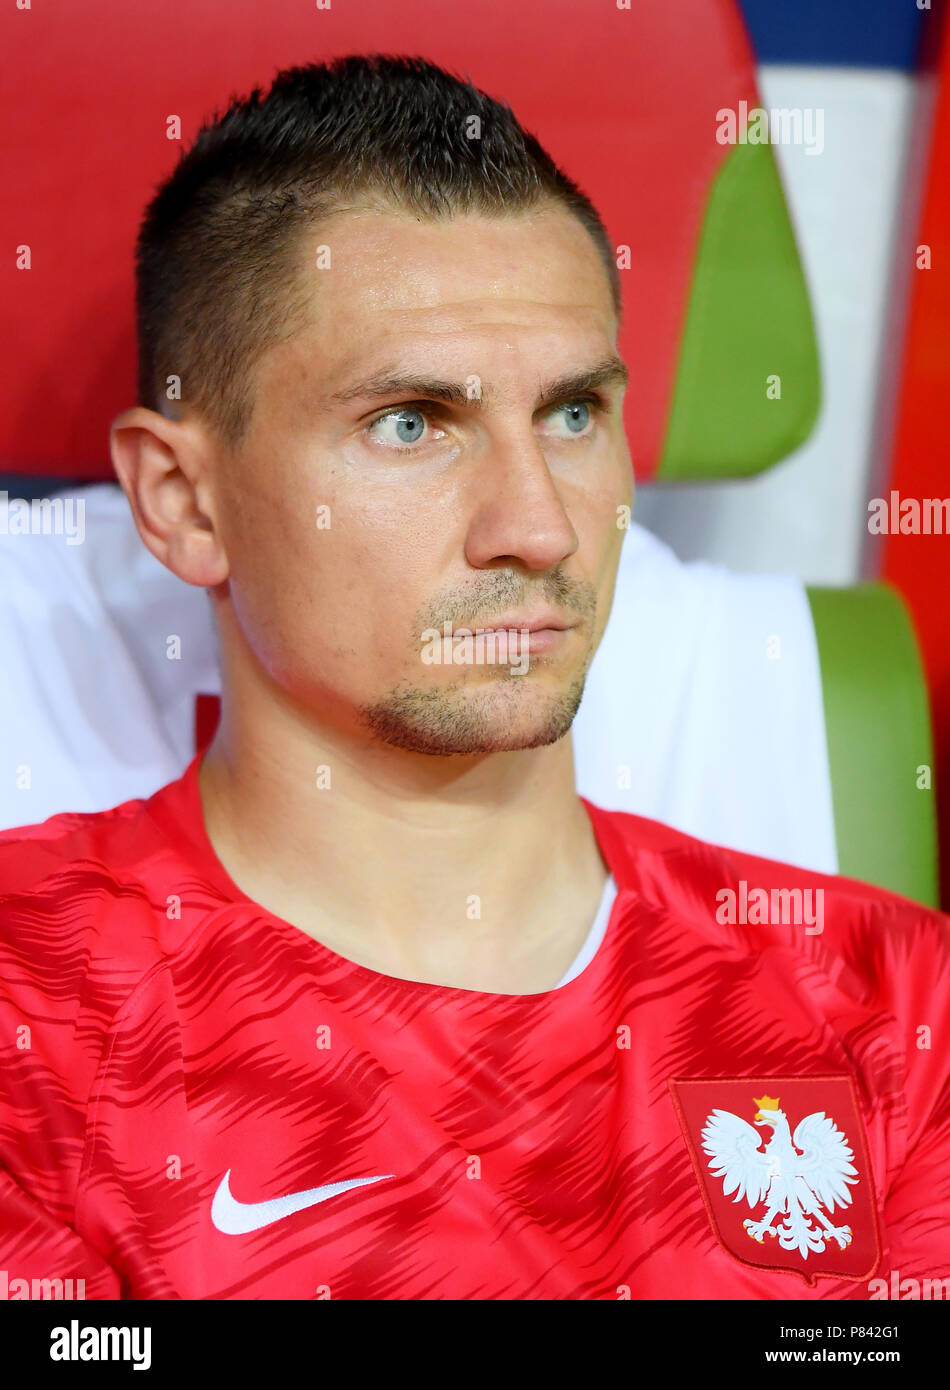 KAZAN, RUSSIA - JUNE 24: Artur Jedrzejczyk of Poland during the 2018 FIFA World Cup Russia group H match between Poland and Colombia at Kazan Arena on June 24, 2018 in Kazan, Russia. (Photo by Lukasz Laskowski/PressFocus/MB Media) Stock Photo